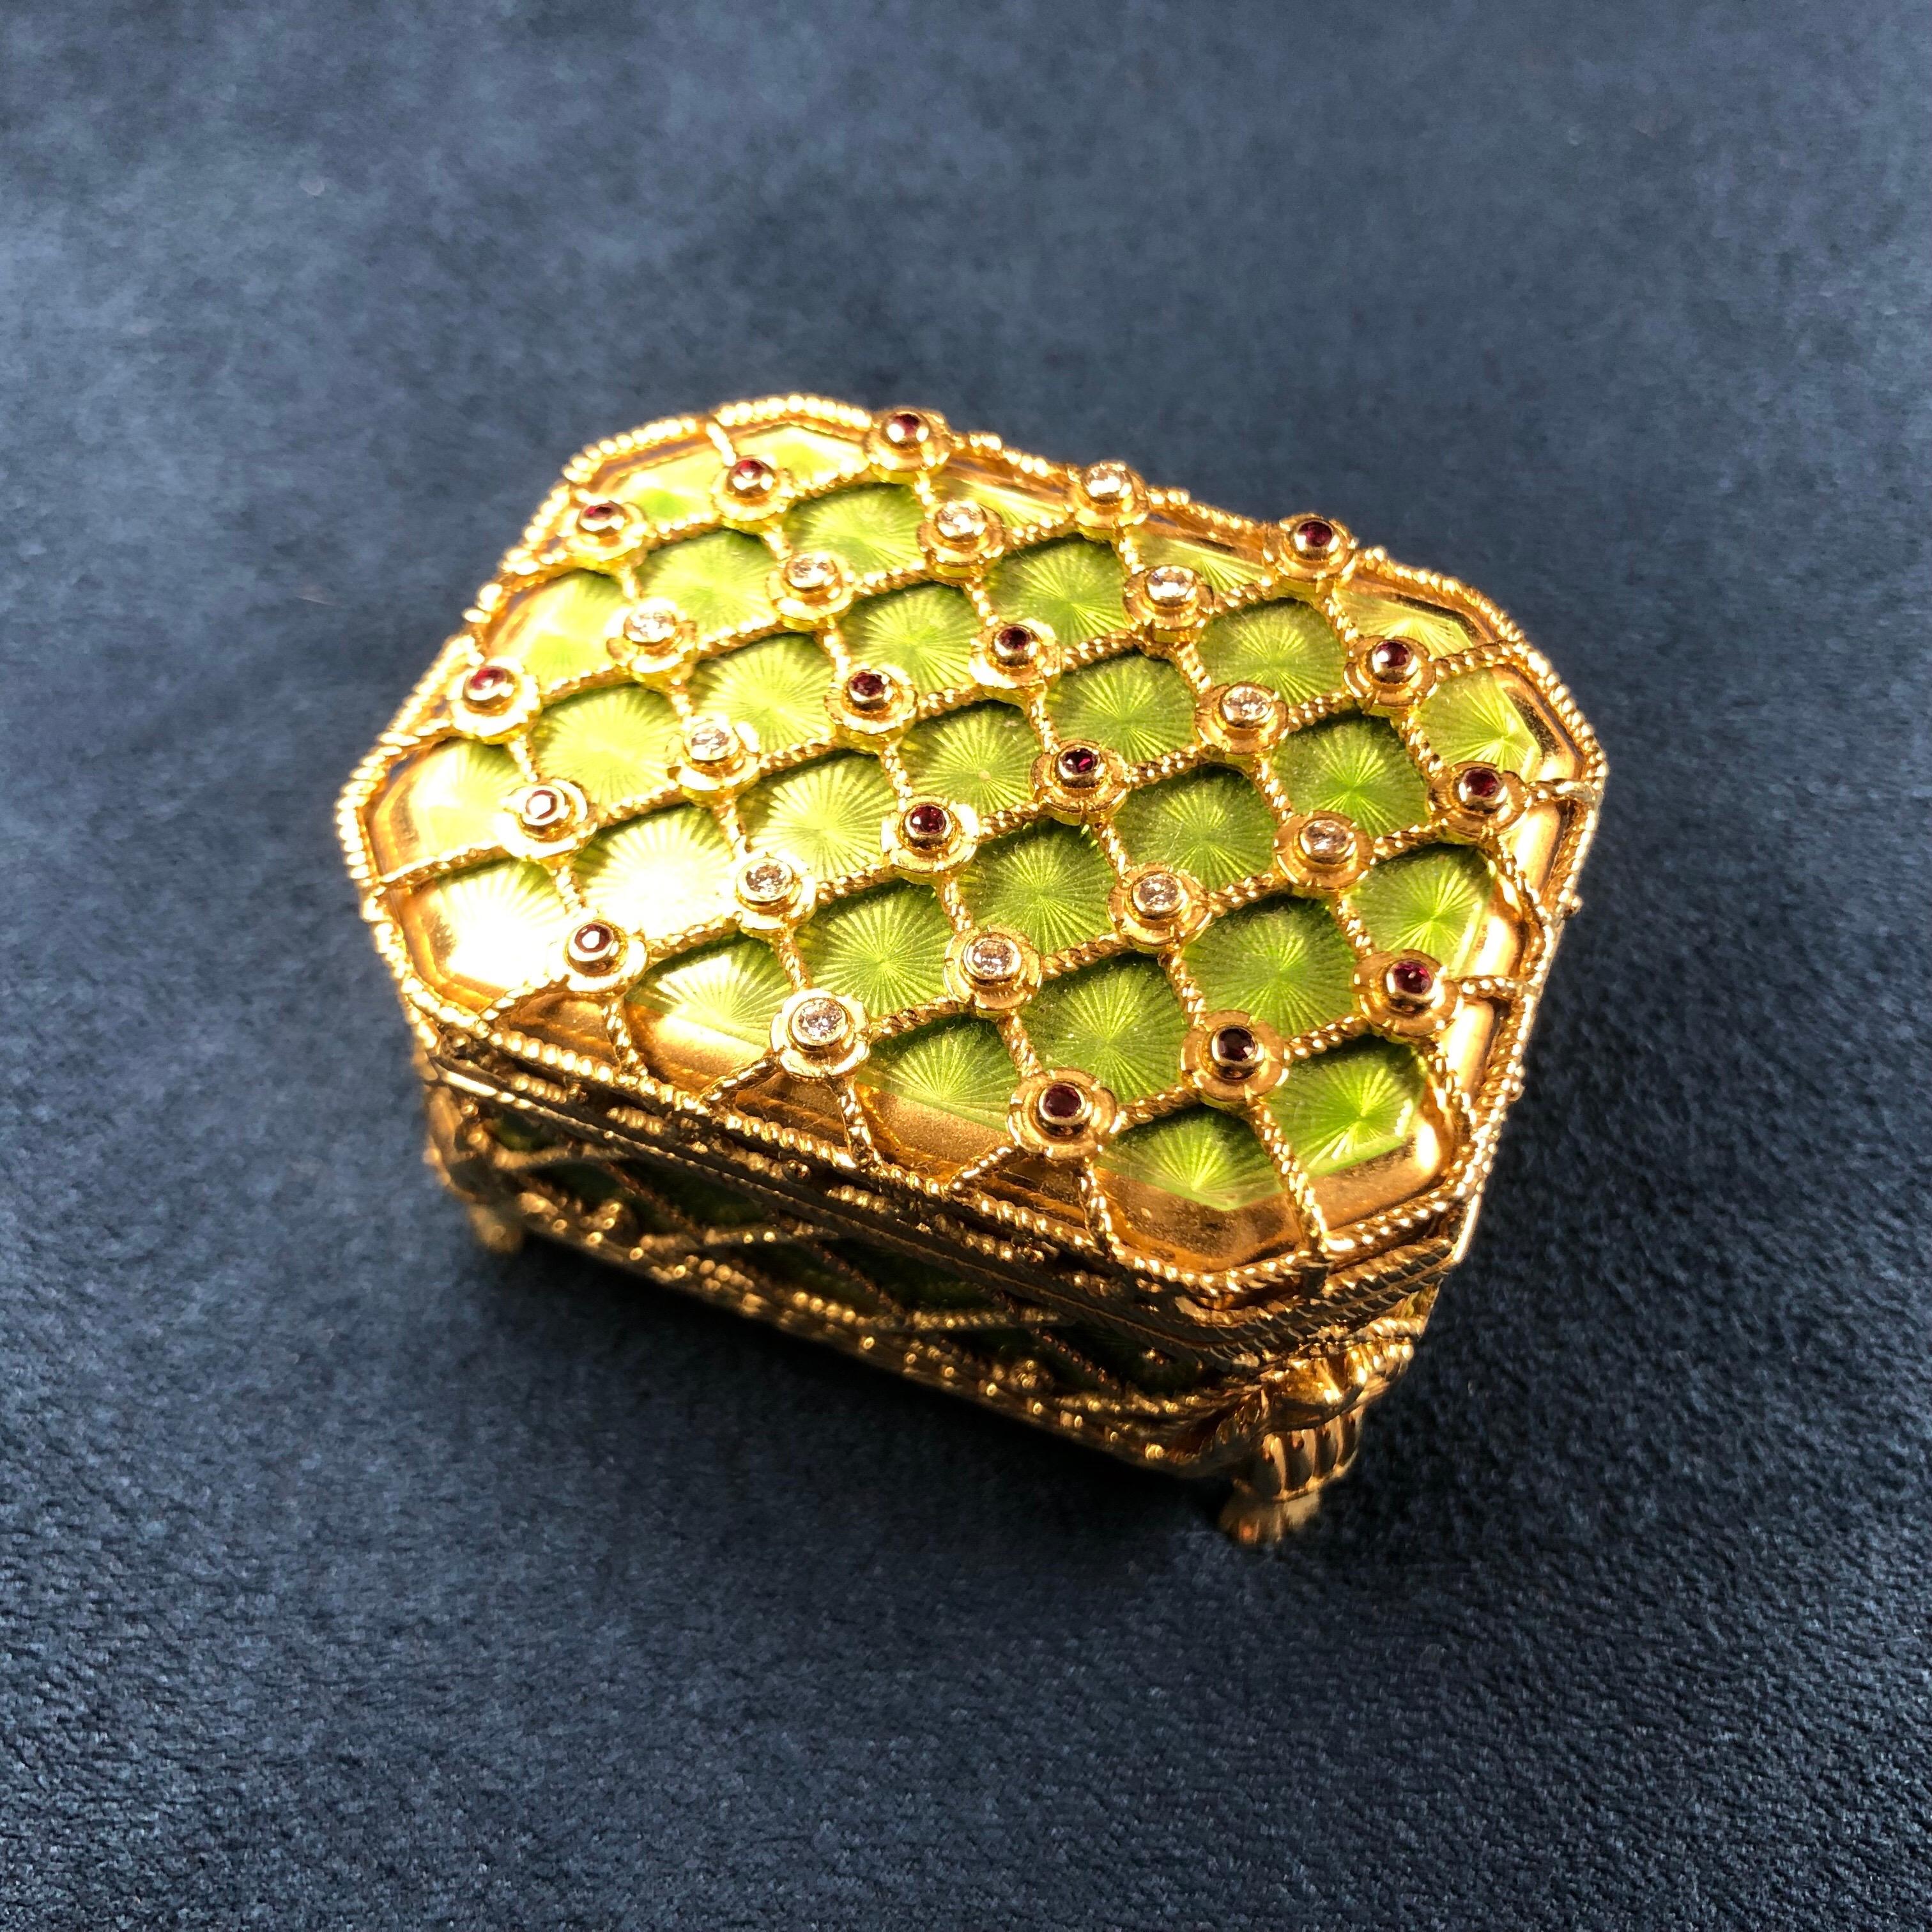 Russian Revival 18 Karat Yellow Gold Enamel Pill Box by Victor Mayer for Fabergé